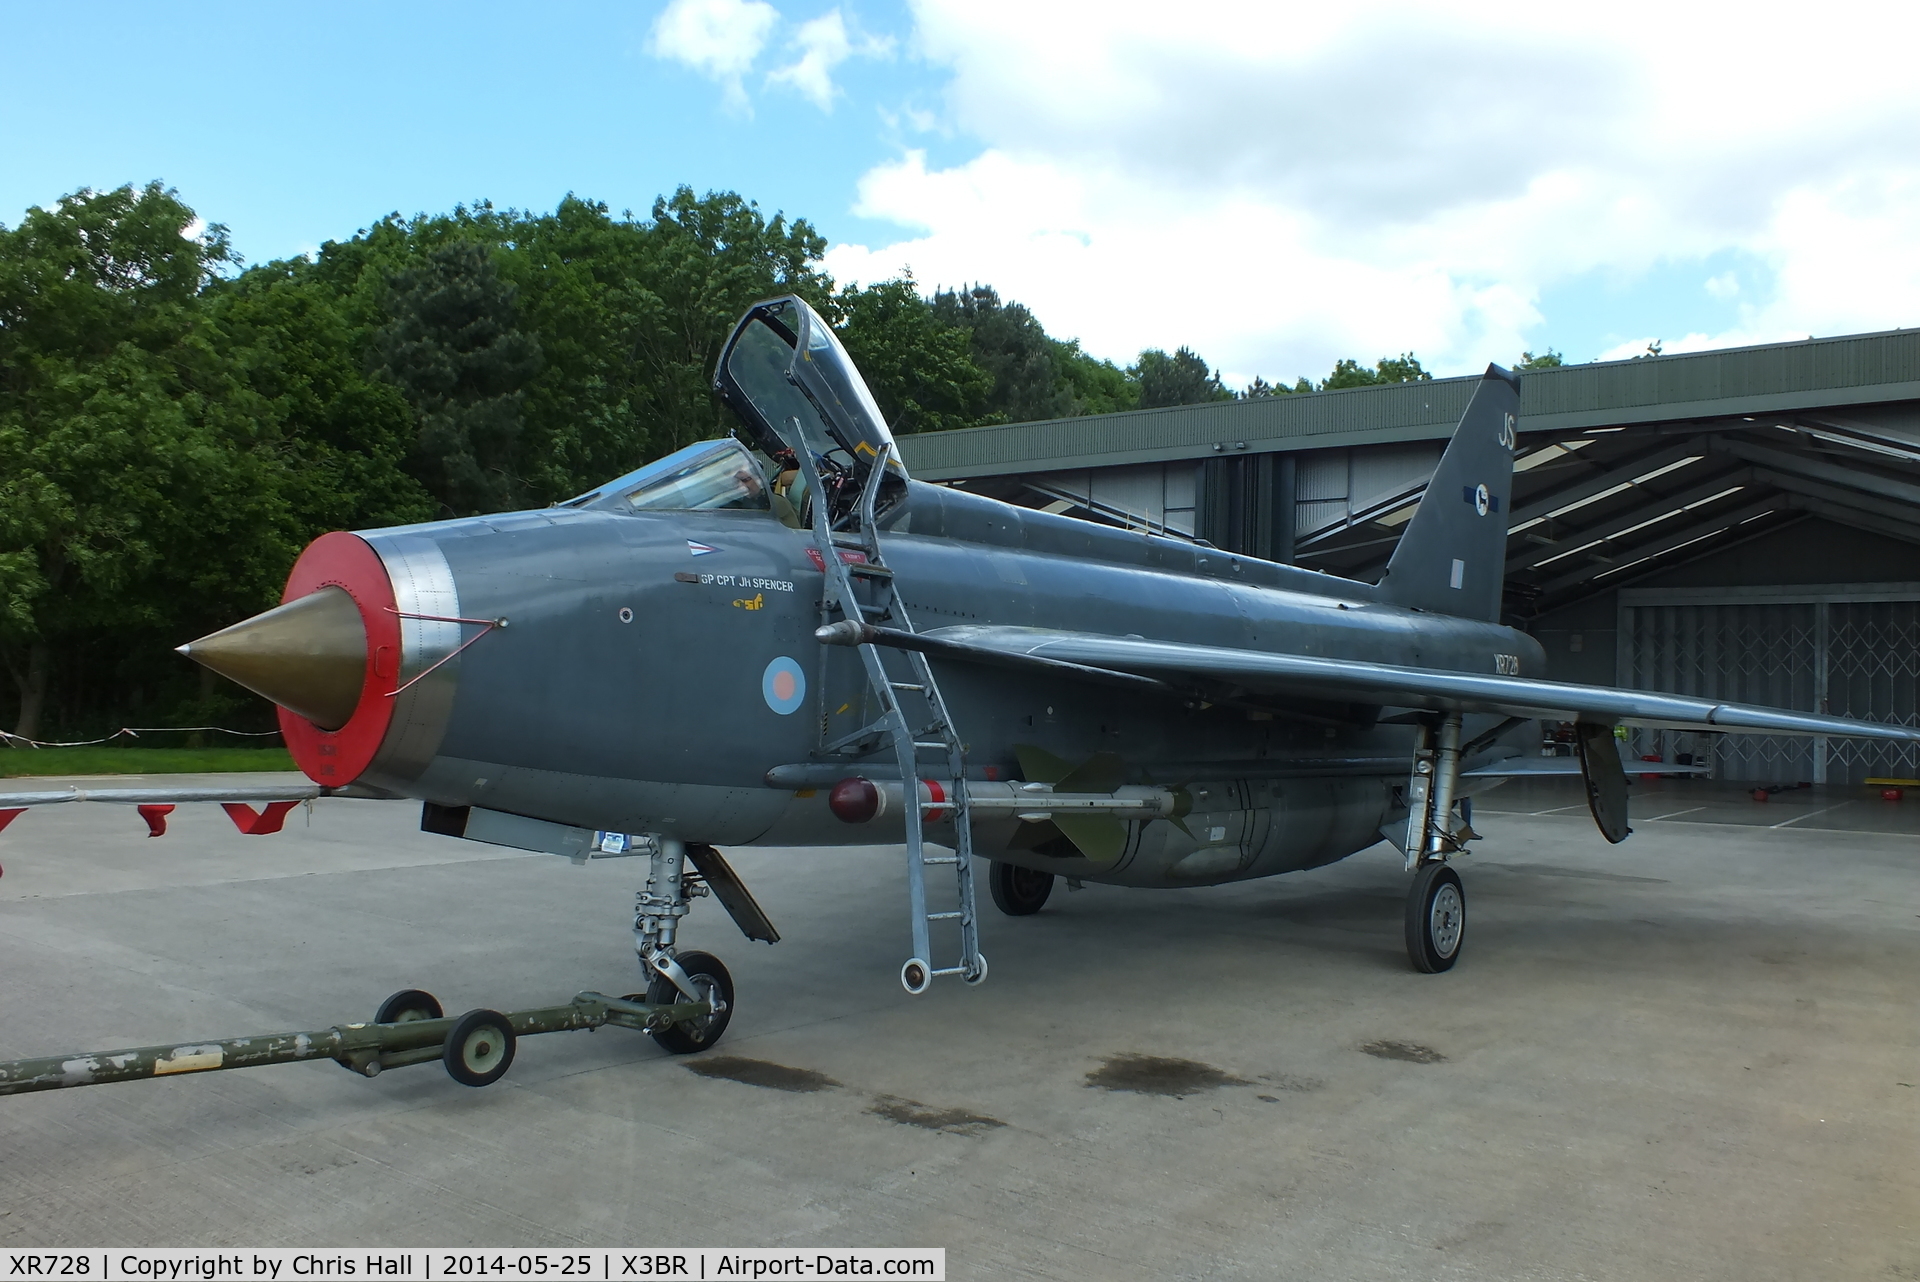 XR728, 1965 English Electric Lightning F.6 C/N 95213, outside the QRA shed prior to it taxy run